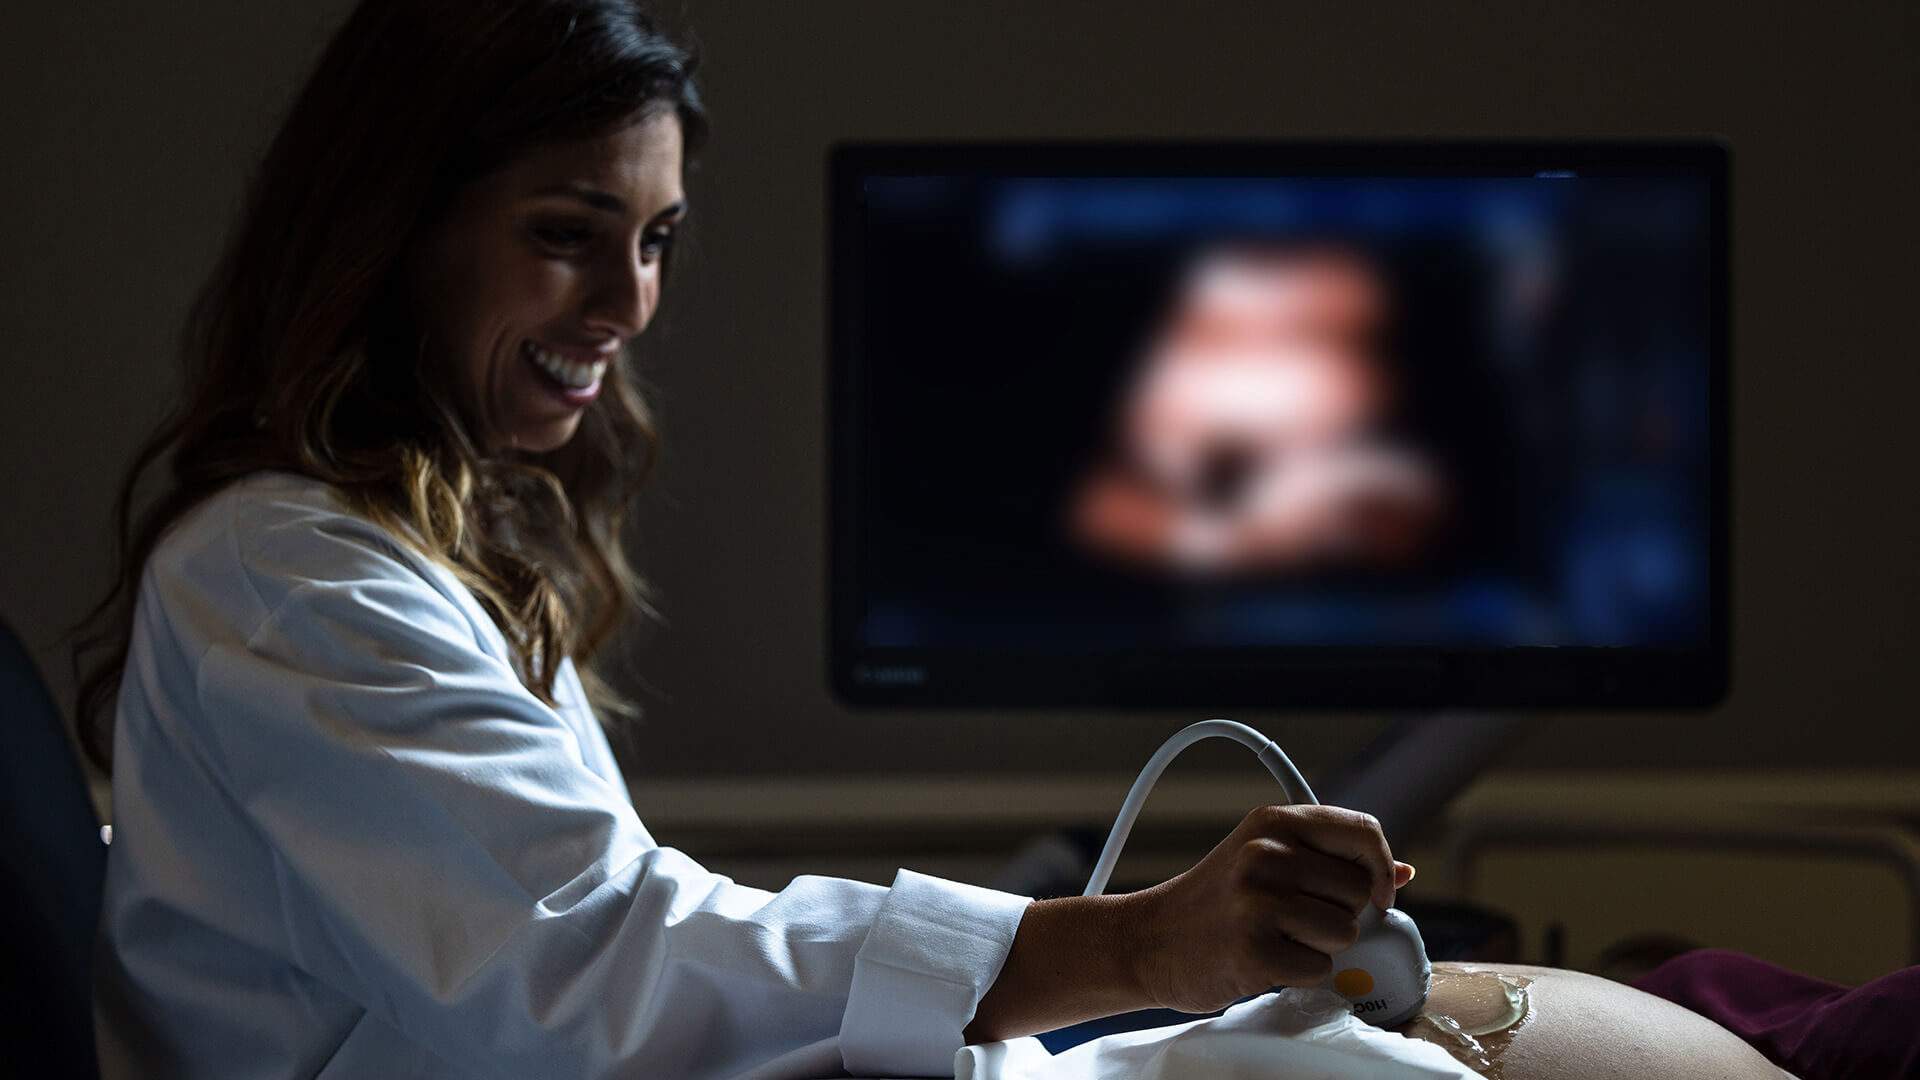 3D Ultrasound: What It Is, Its Purpose, and Limitations